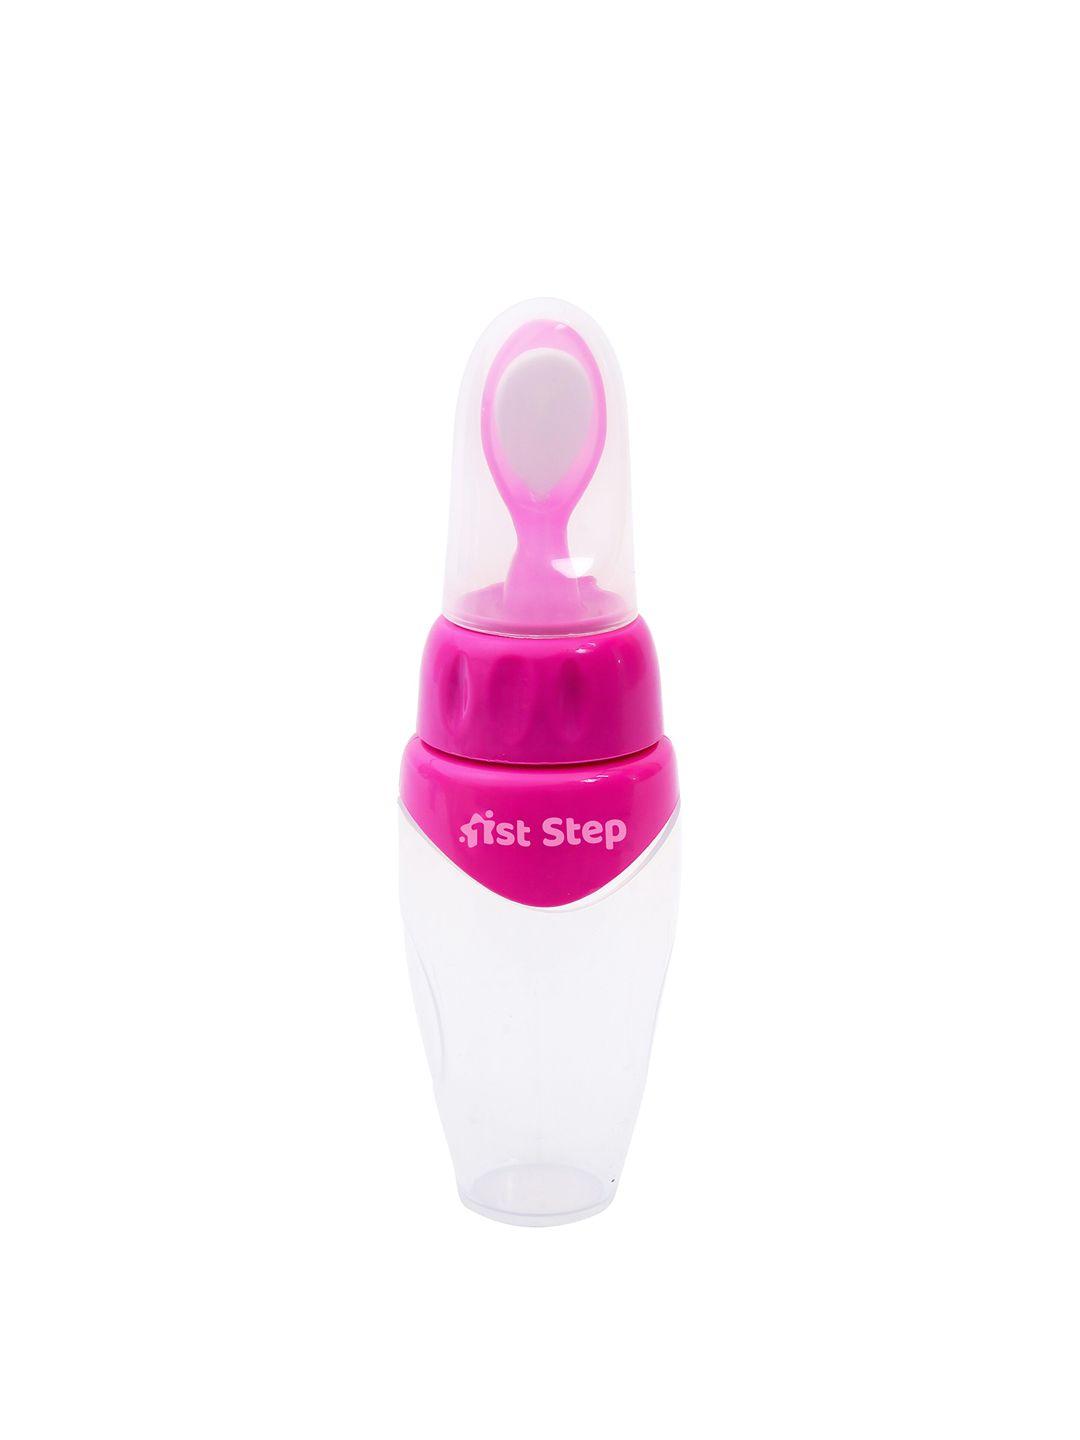 1st step infant kids pink solid squeezy spoon feeder